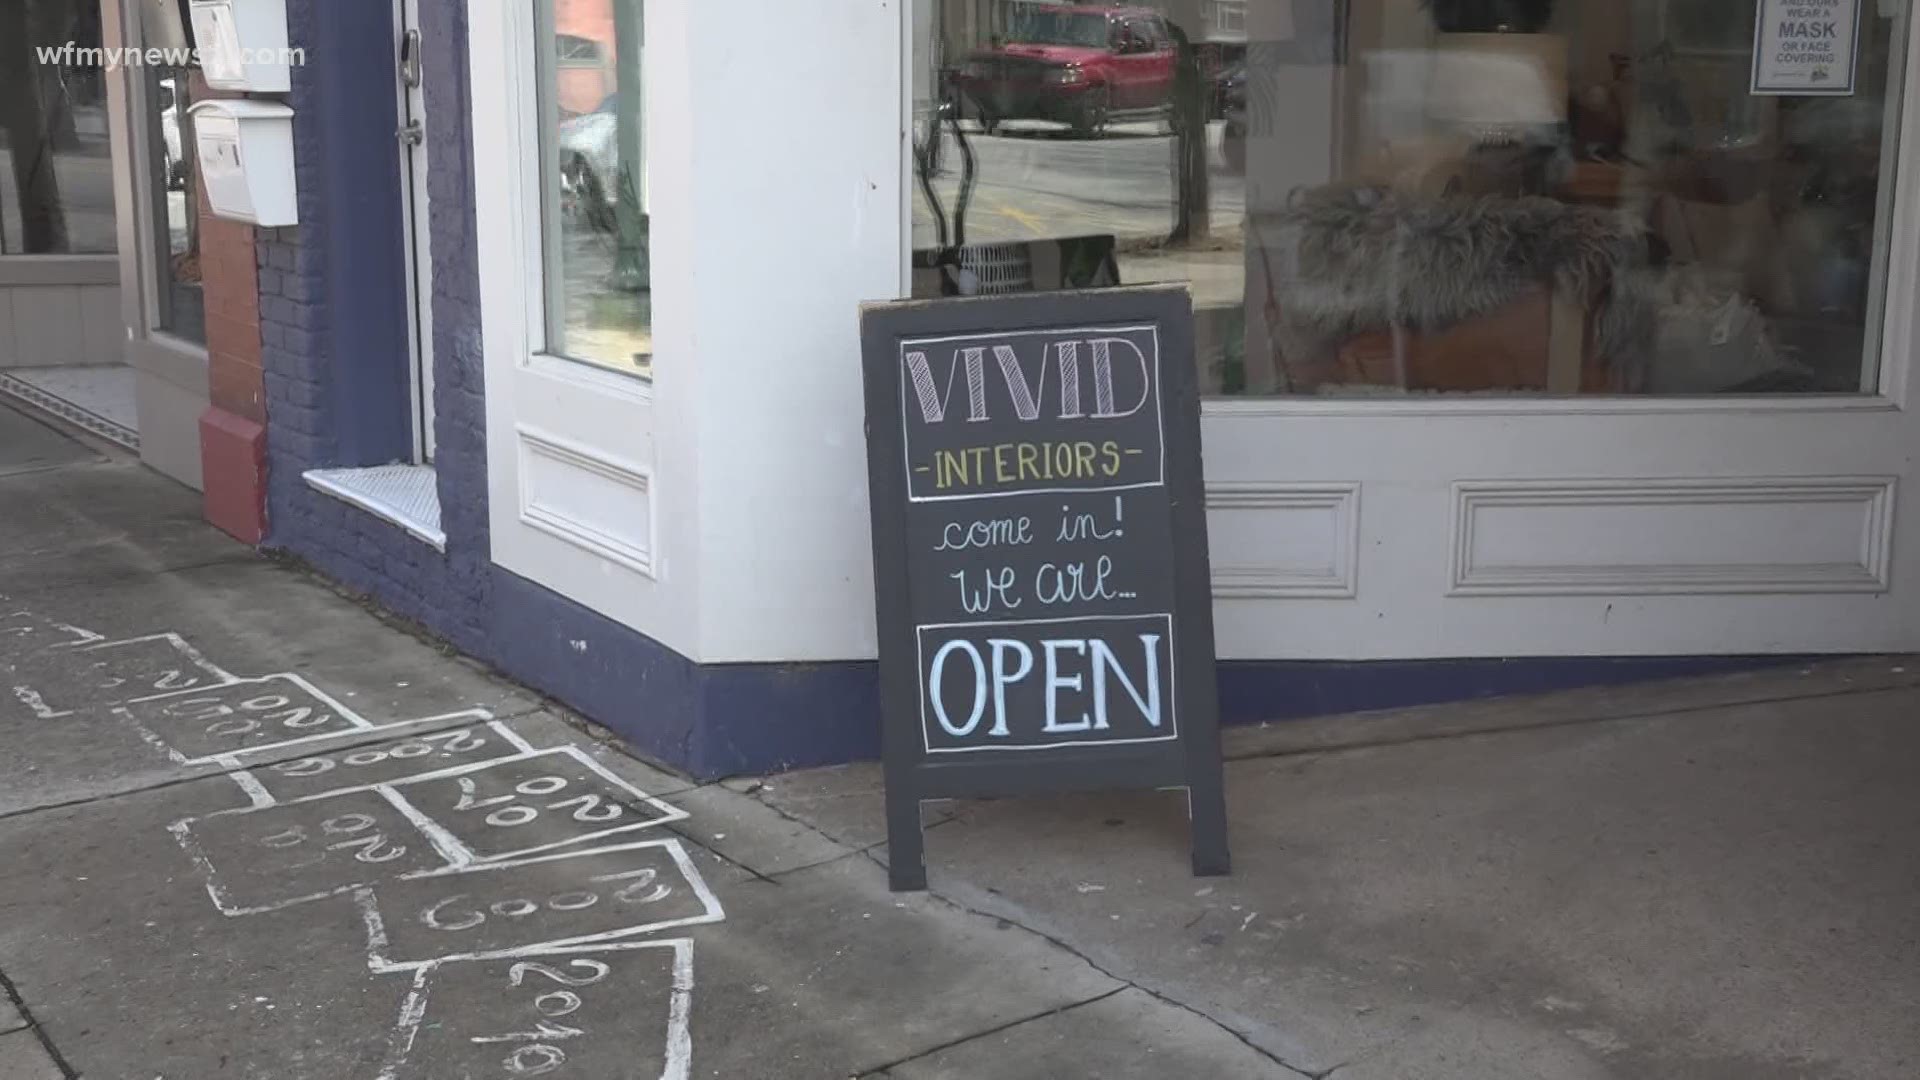 Gov. Cooper's new executive order has now made a way for the state to start getting back to normal after the pandemic shuttered businesses for more than a year.